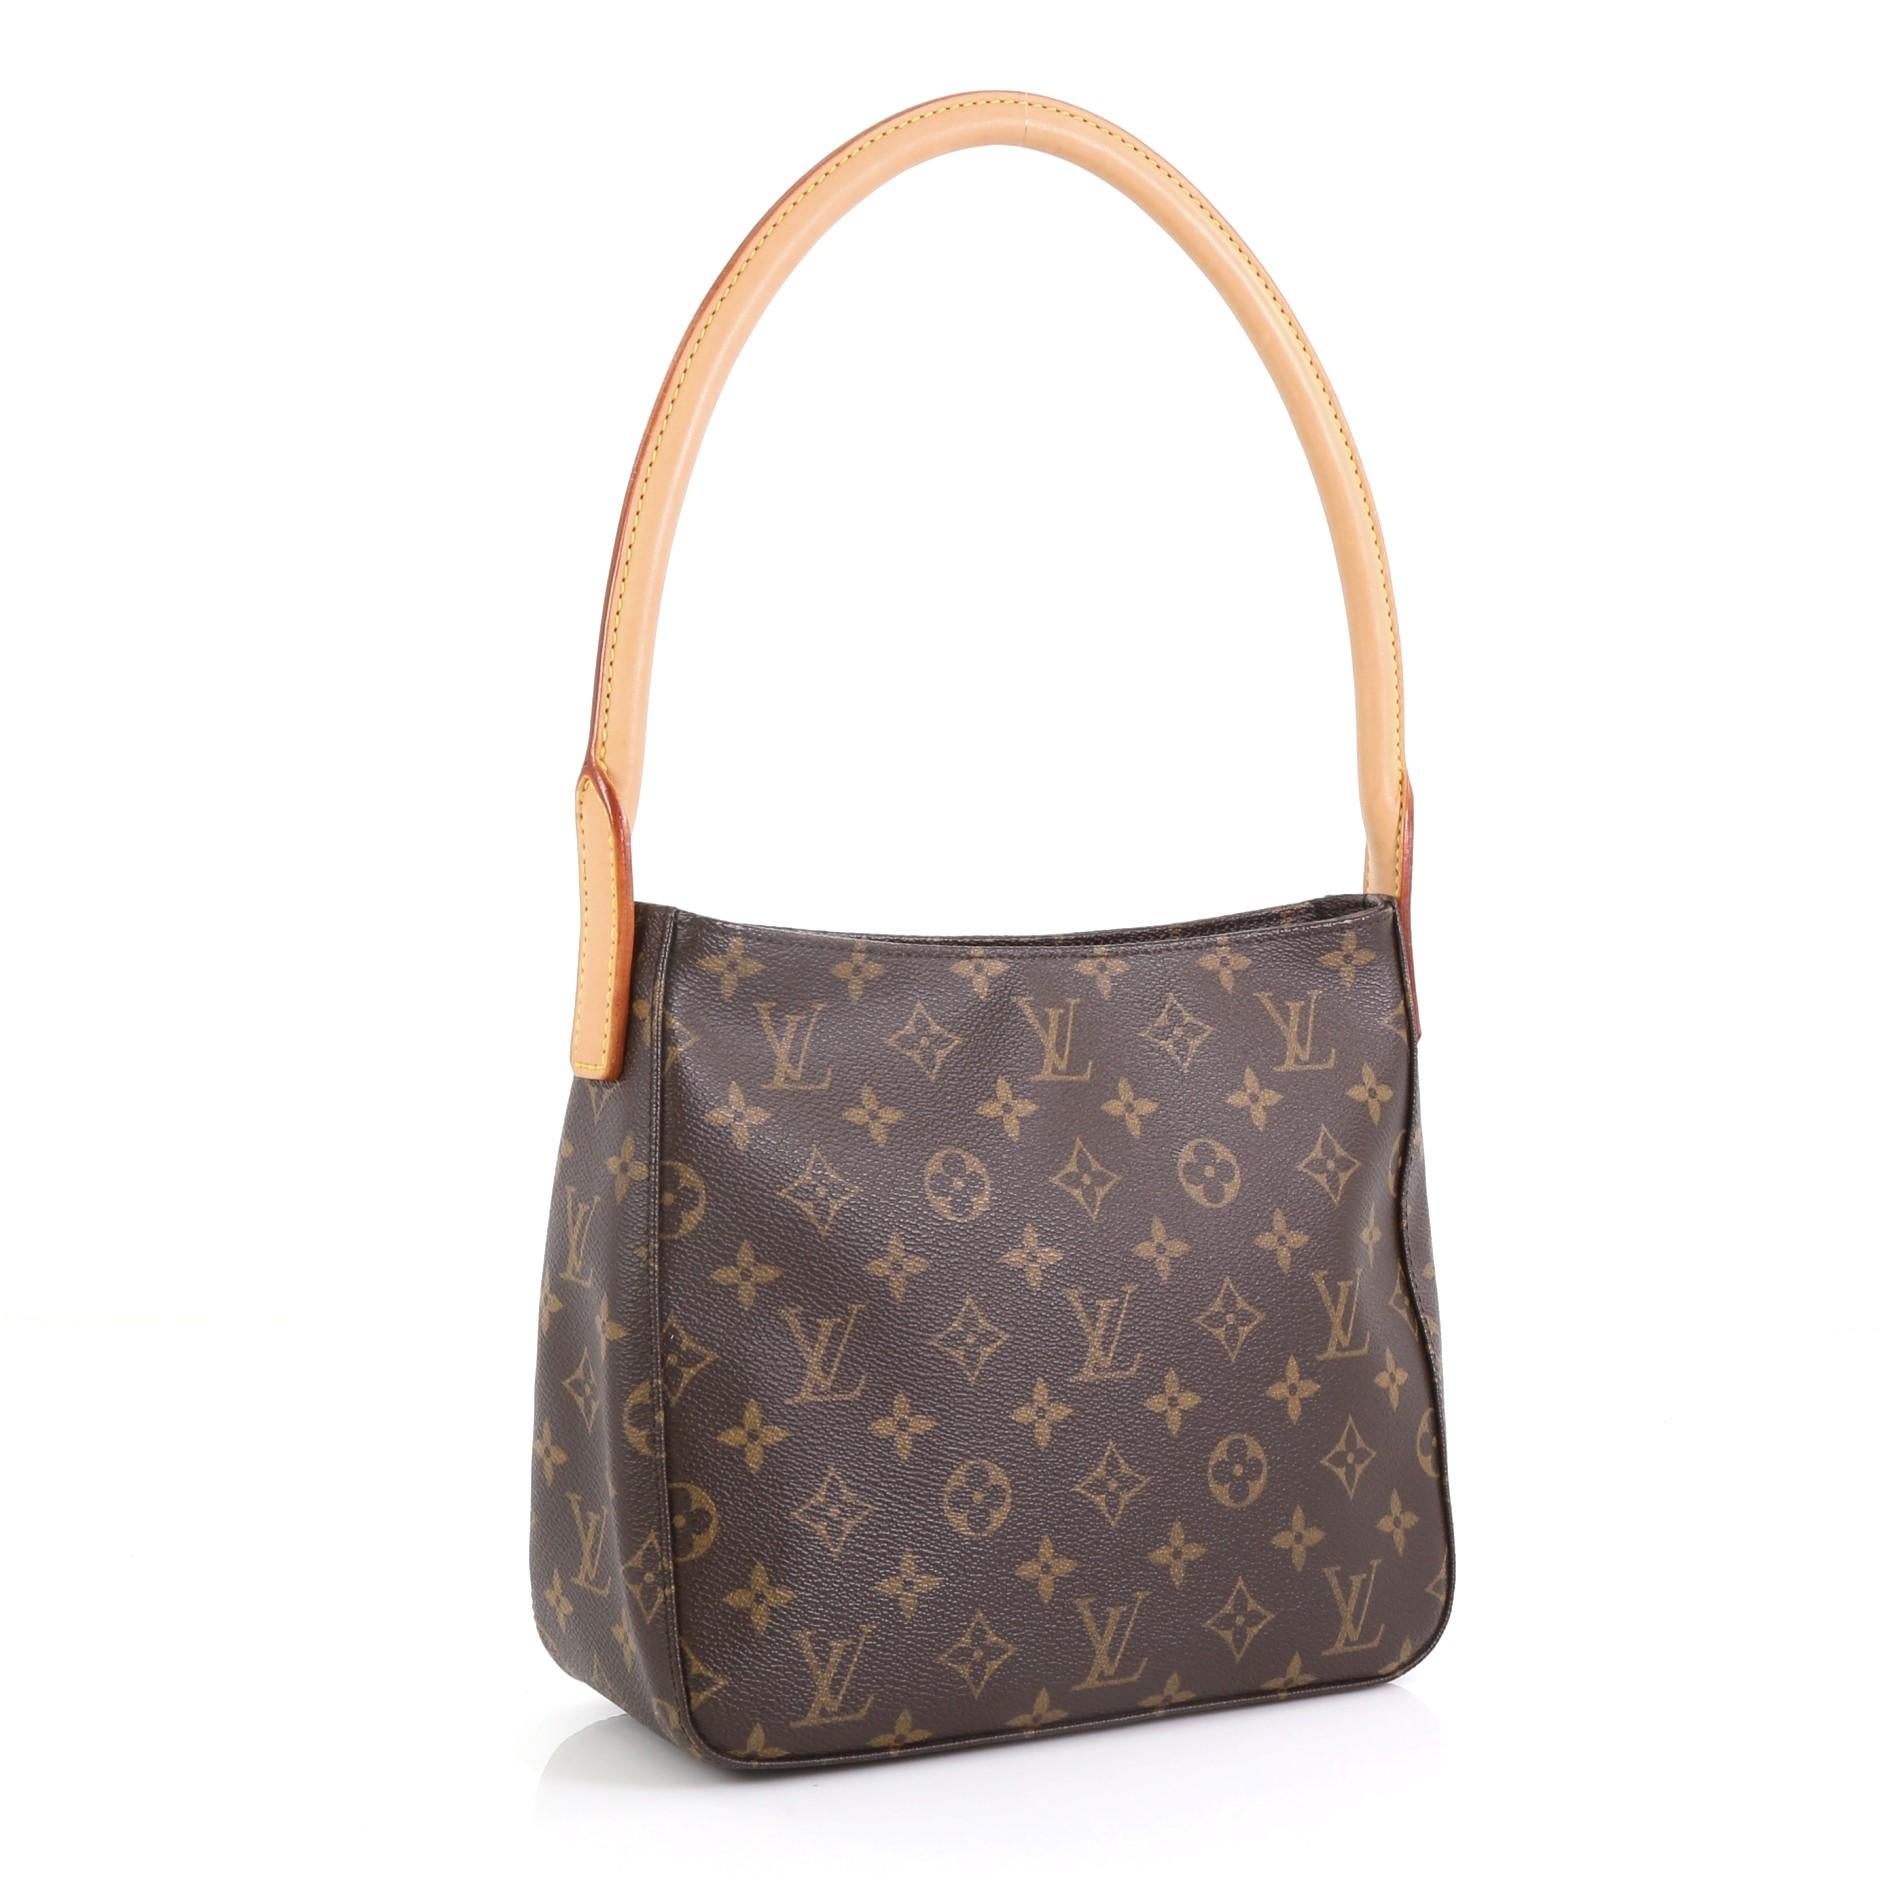 This Louis Vuitton Looping Handbag Monogram Canvas MM, crafted from brown monogram coated canvas, features a thick vachetta cowhide looped strap and gold-tone hardware. Its zip closure opens to a neutral microfiber interior with zip and slip